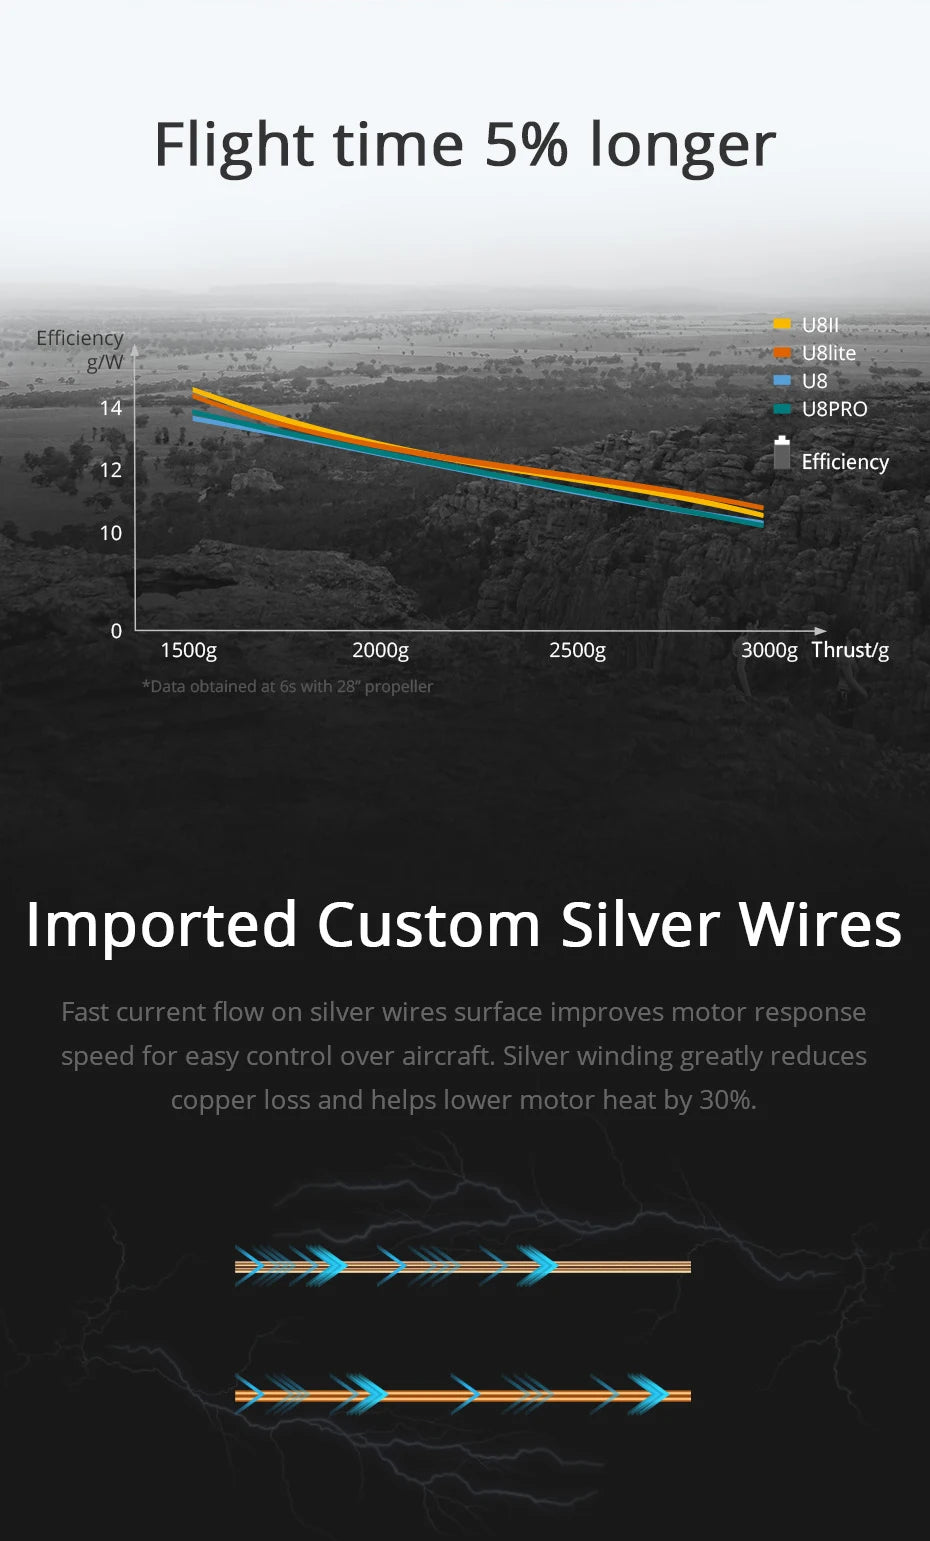 T-motor, silver winding greatly reduces copper loss and helps lower motor by 30% . grw flow